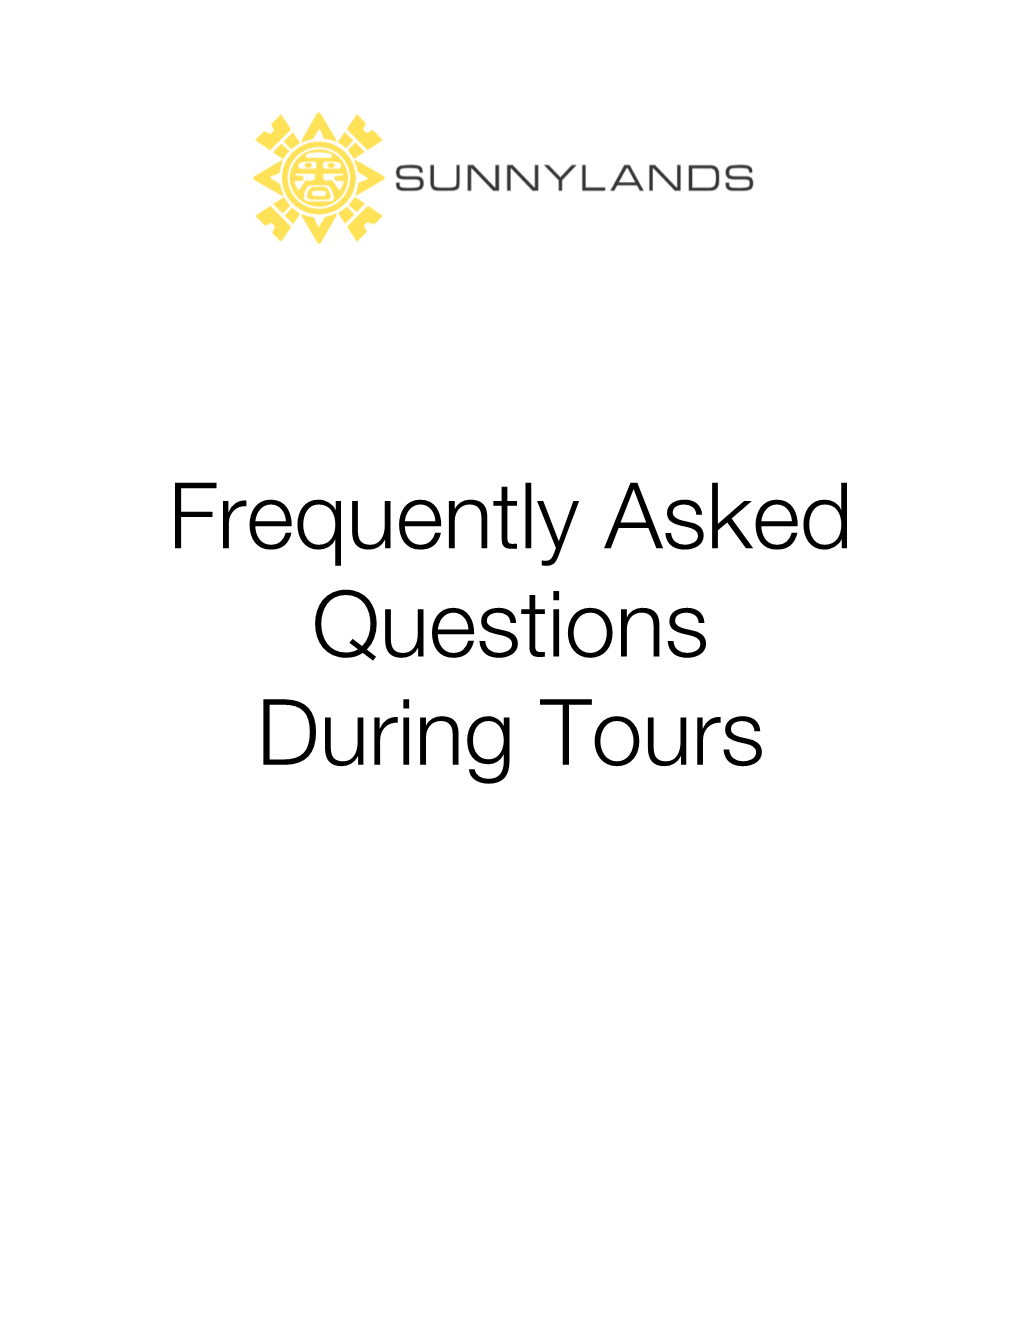 Frequently Asked Questions During Tours